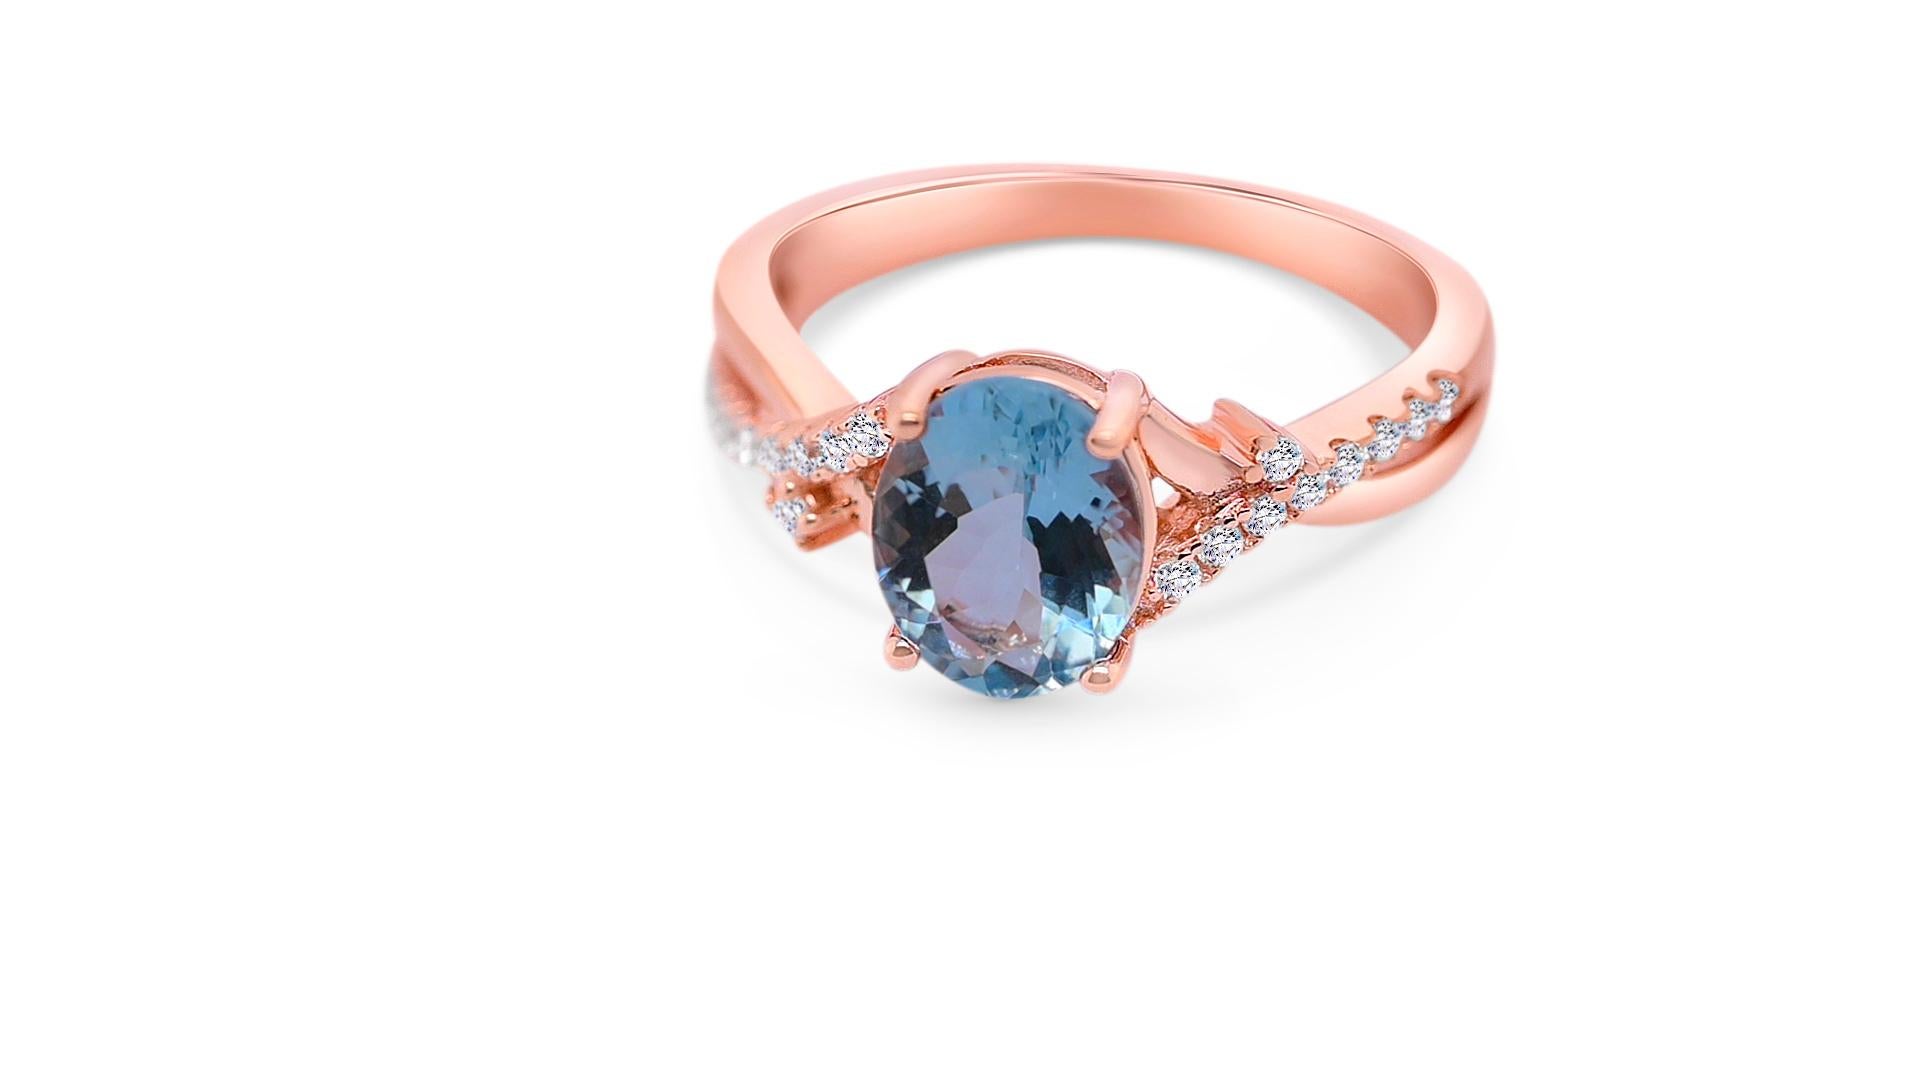 Welcome to Blue Star Gems NY LLC! Discover popular engagement ring & wedding ring designs from classic to vintage inspired. We offer Joyful jewelry for everyday wear. Just for you. We go above and beyond the current industry standards to offer